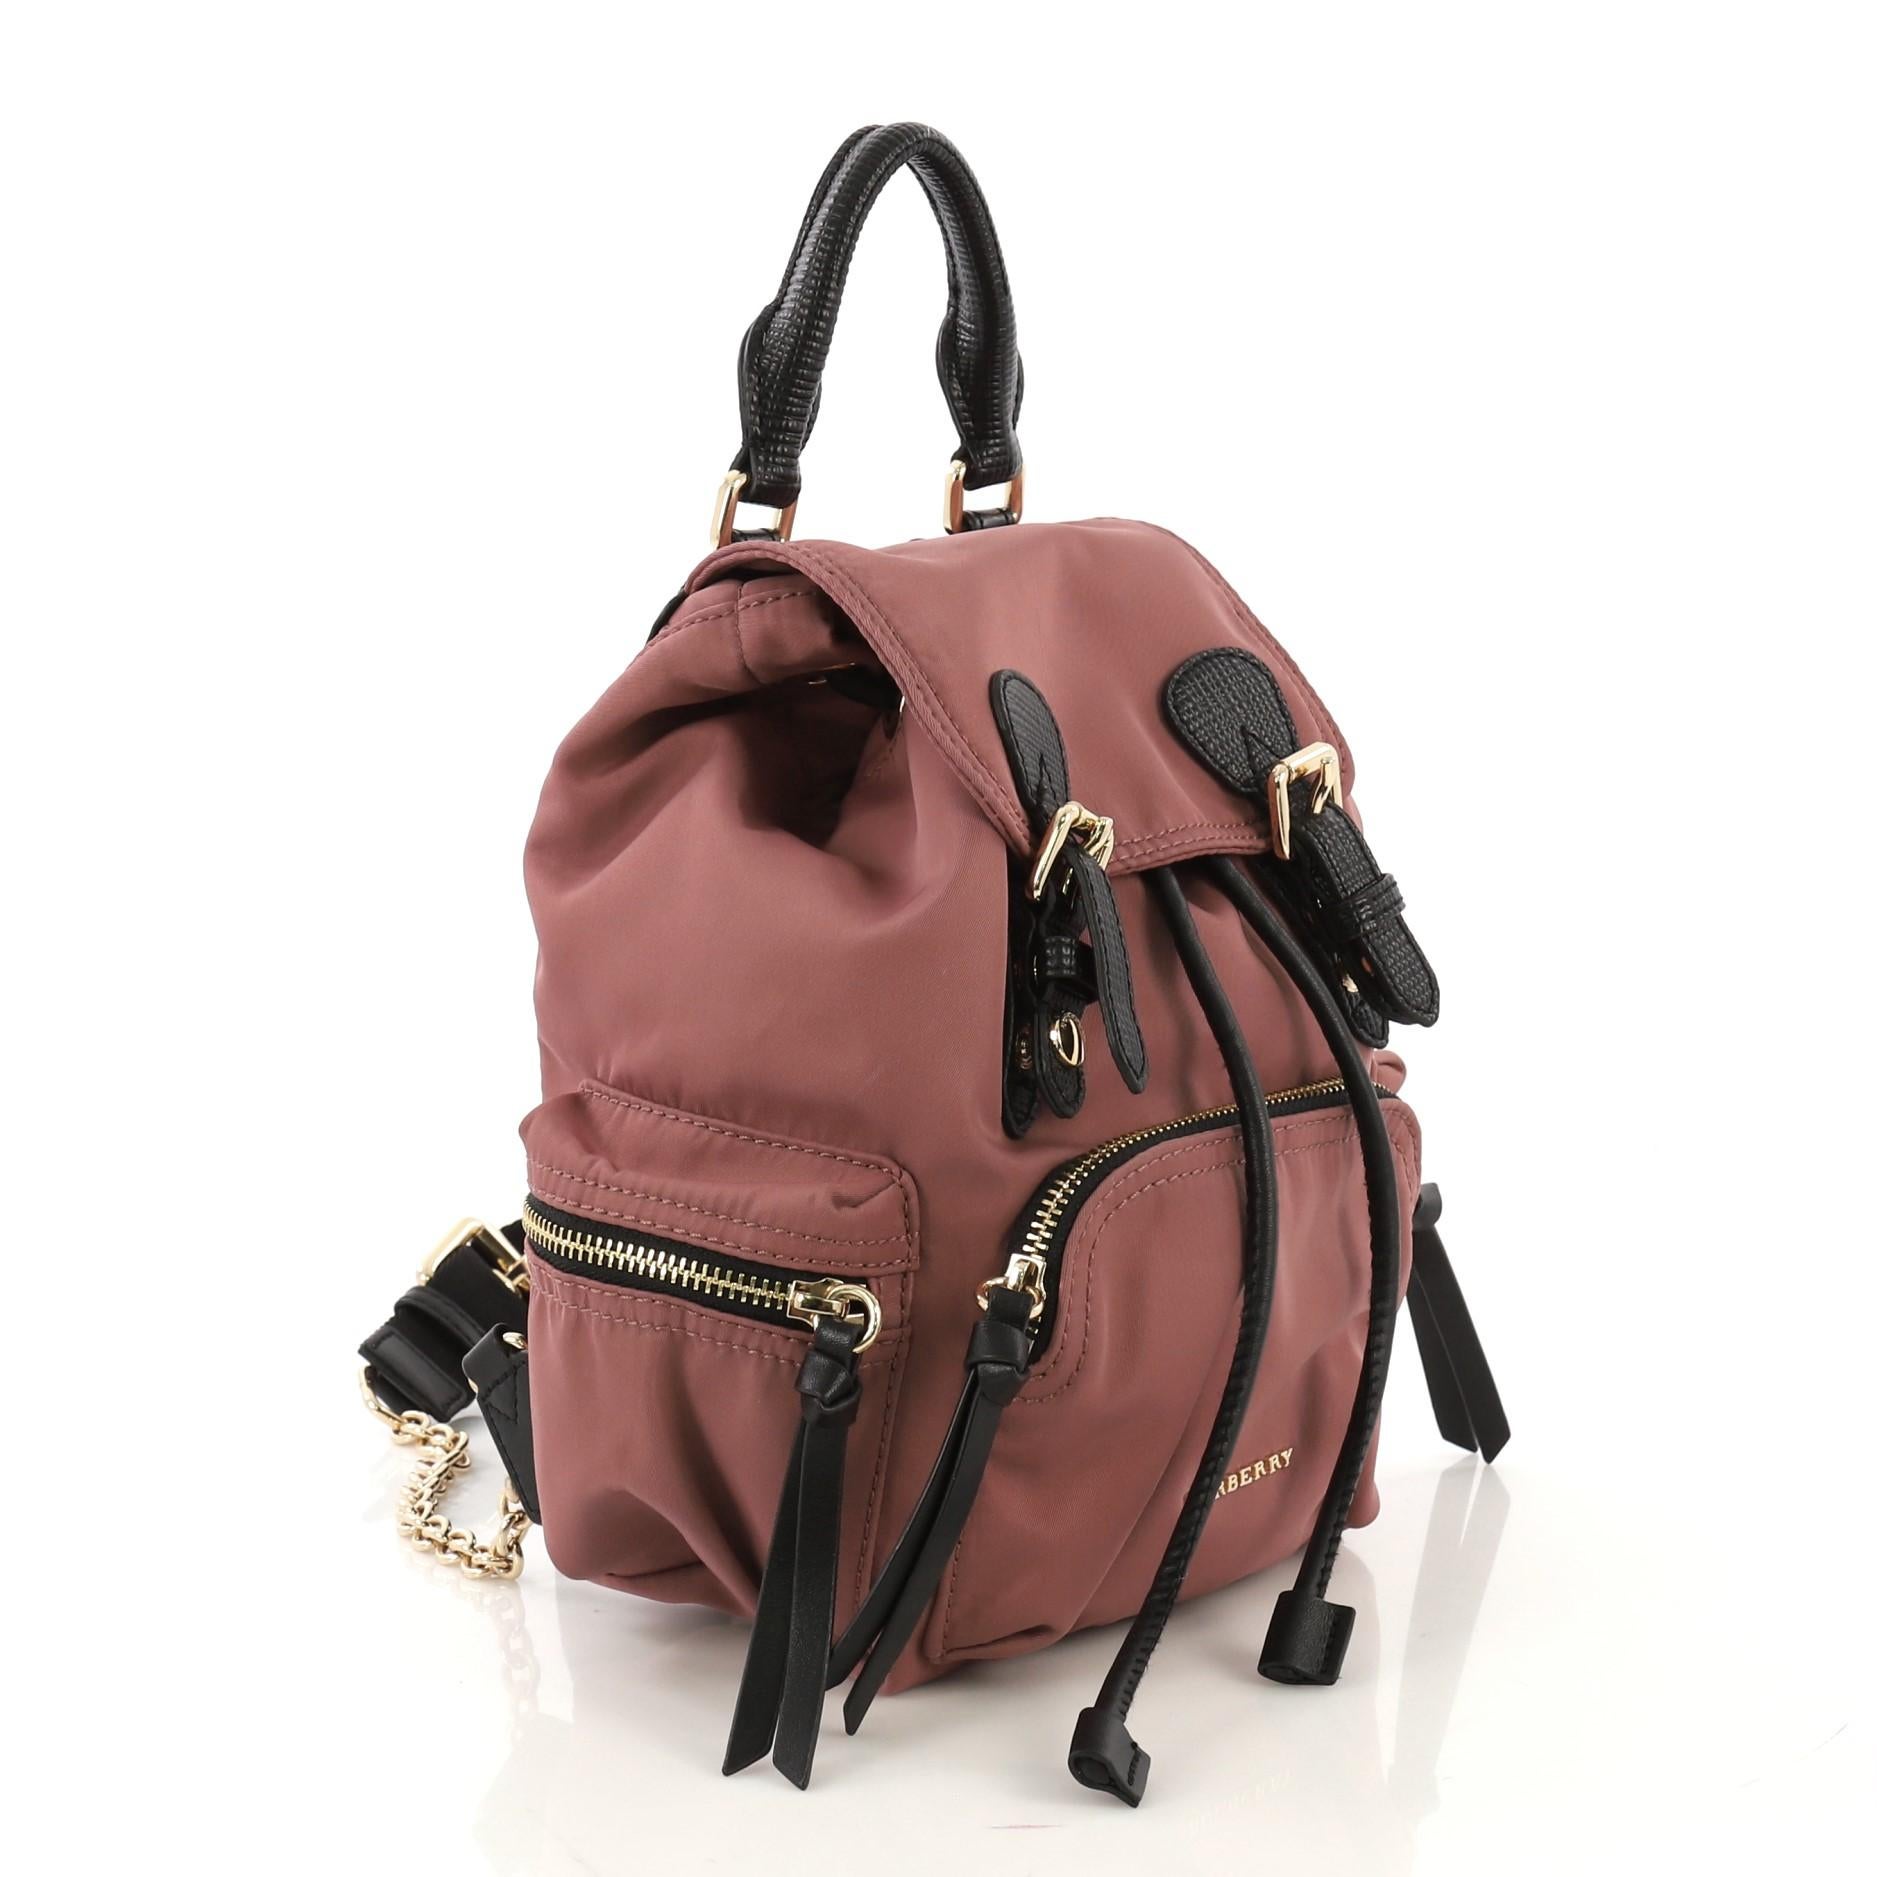 This Burberry Rucksack Backpack Nylon with Leather Small, crafted from dusty pink nylon with black leather, features a leather top handle, adjustable shoulder straps, exterior zip pockets, quilted back panel, and gold-tone hardware. Its drawstring